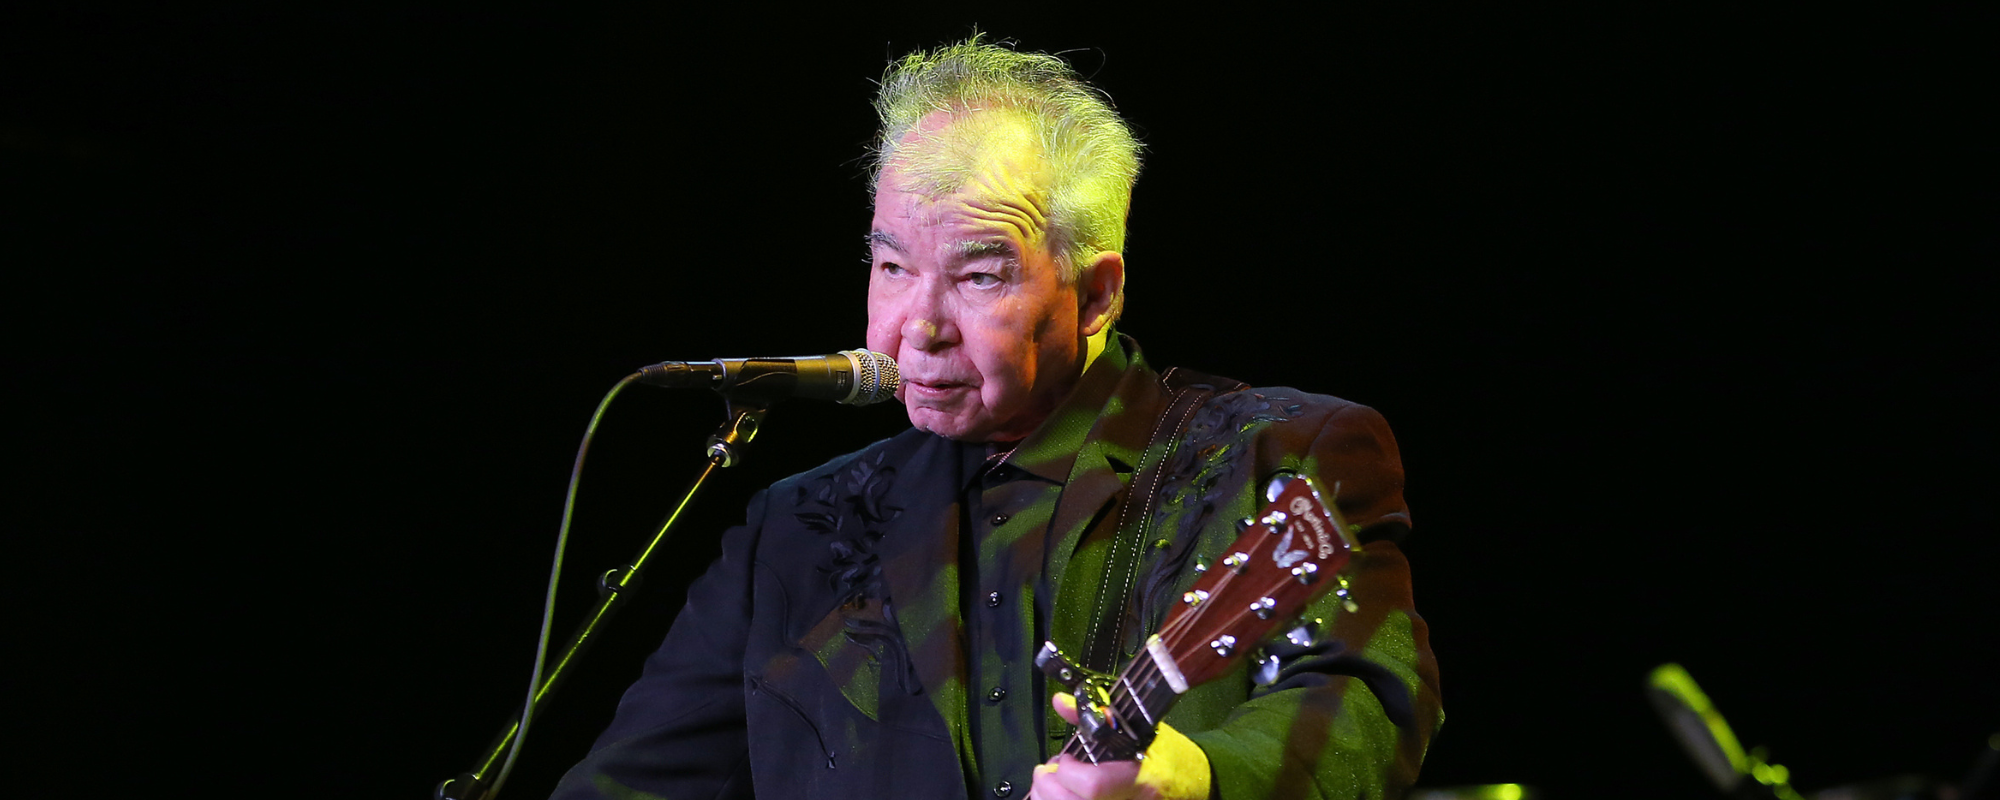 The Anti-War Meaning Behind “The Great Compromise” by John Prine